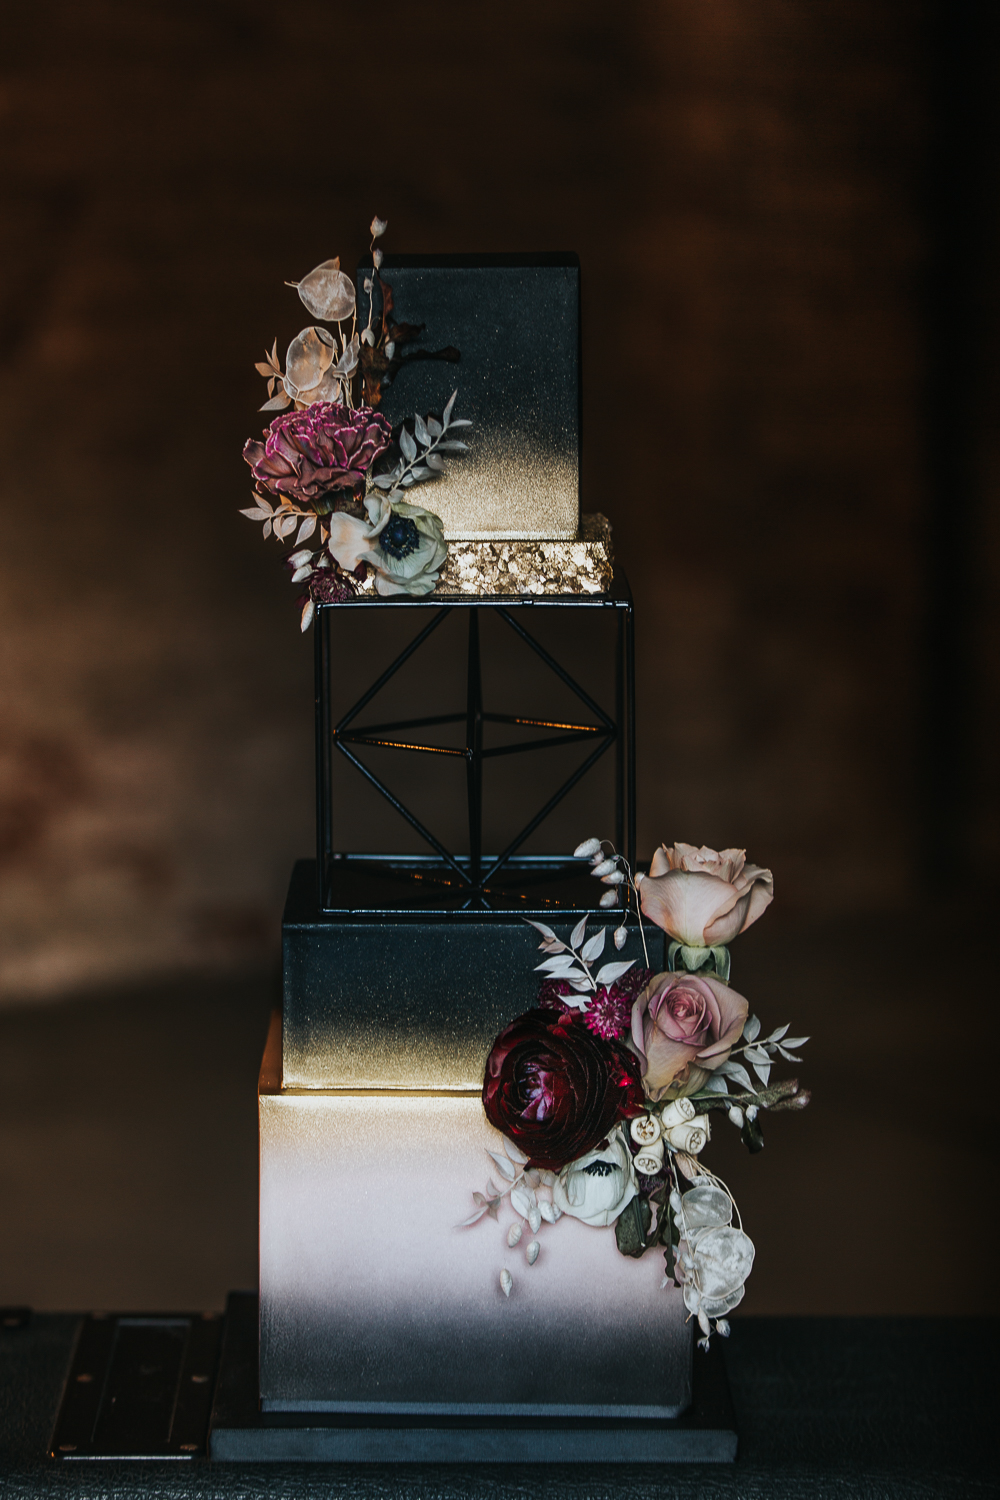 The wedding cake was a white, black and gold glitter one, with bright blooms and greenery